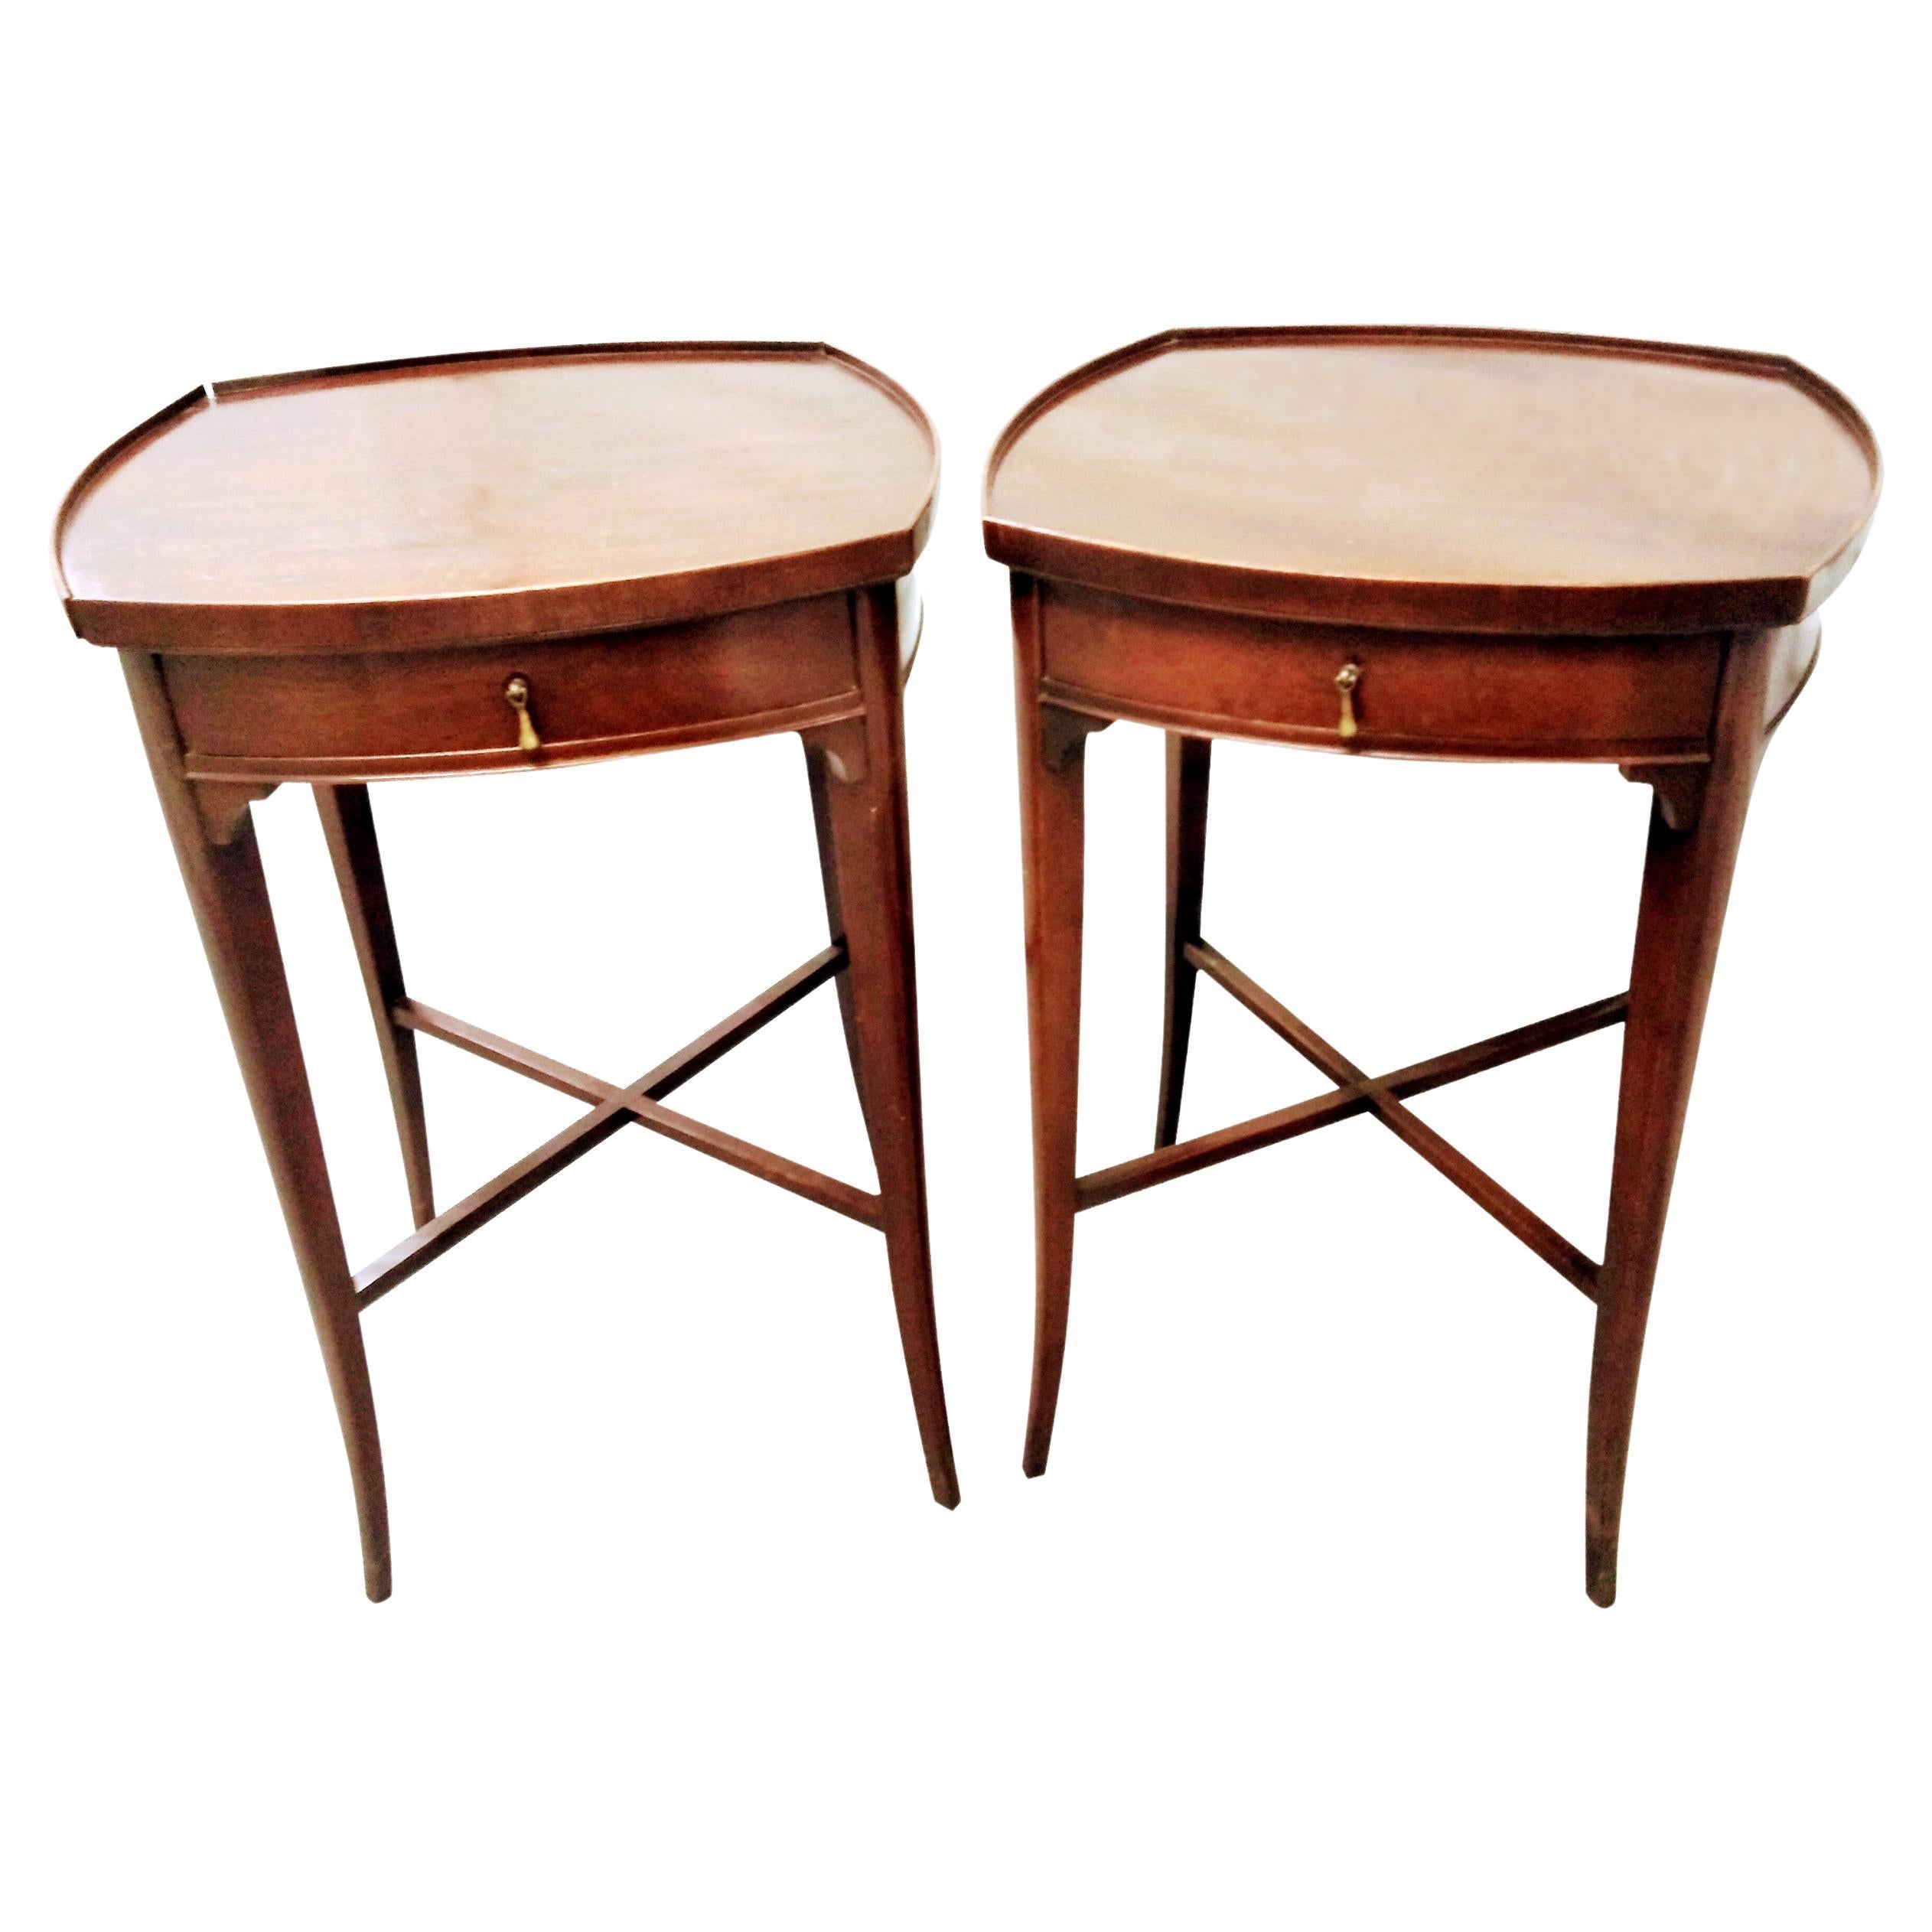 Pair of Sheraton Style Side Tables